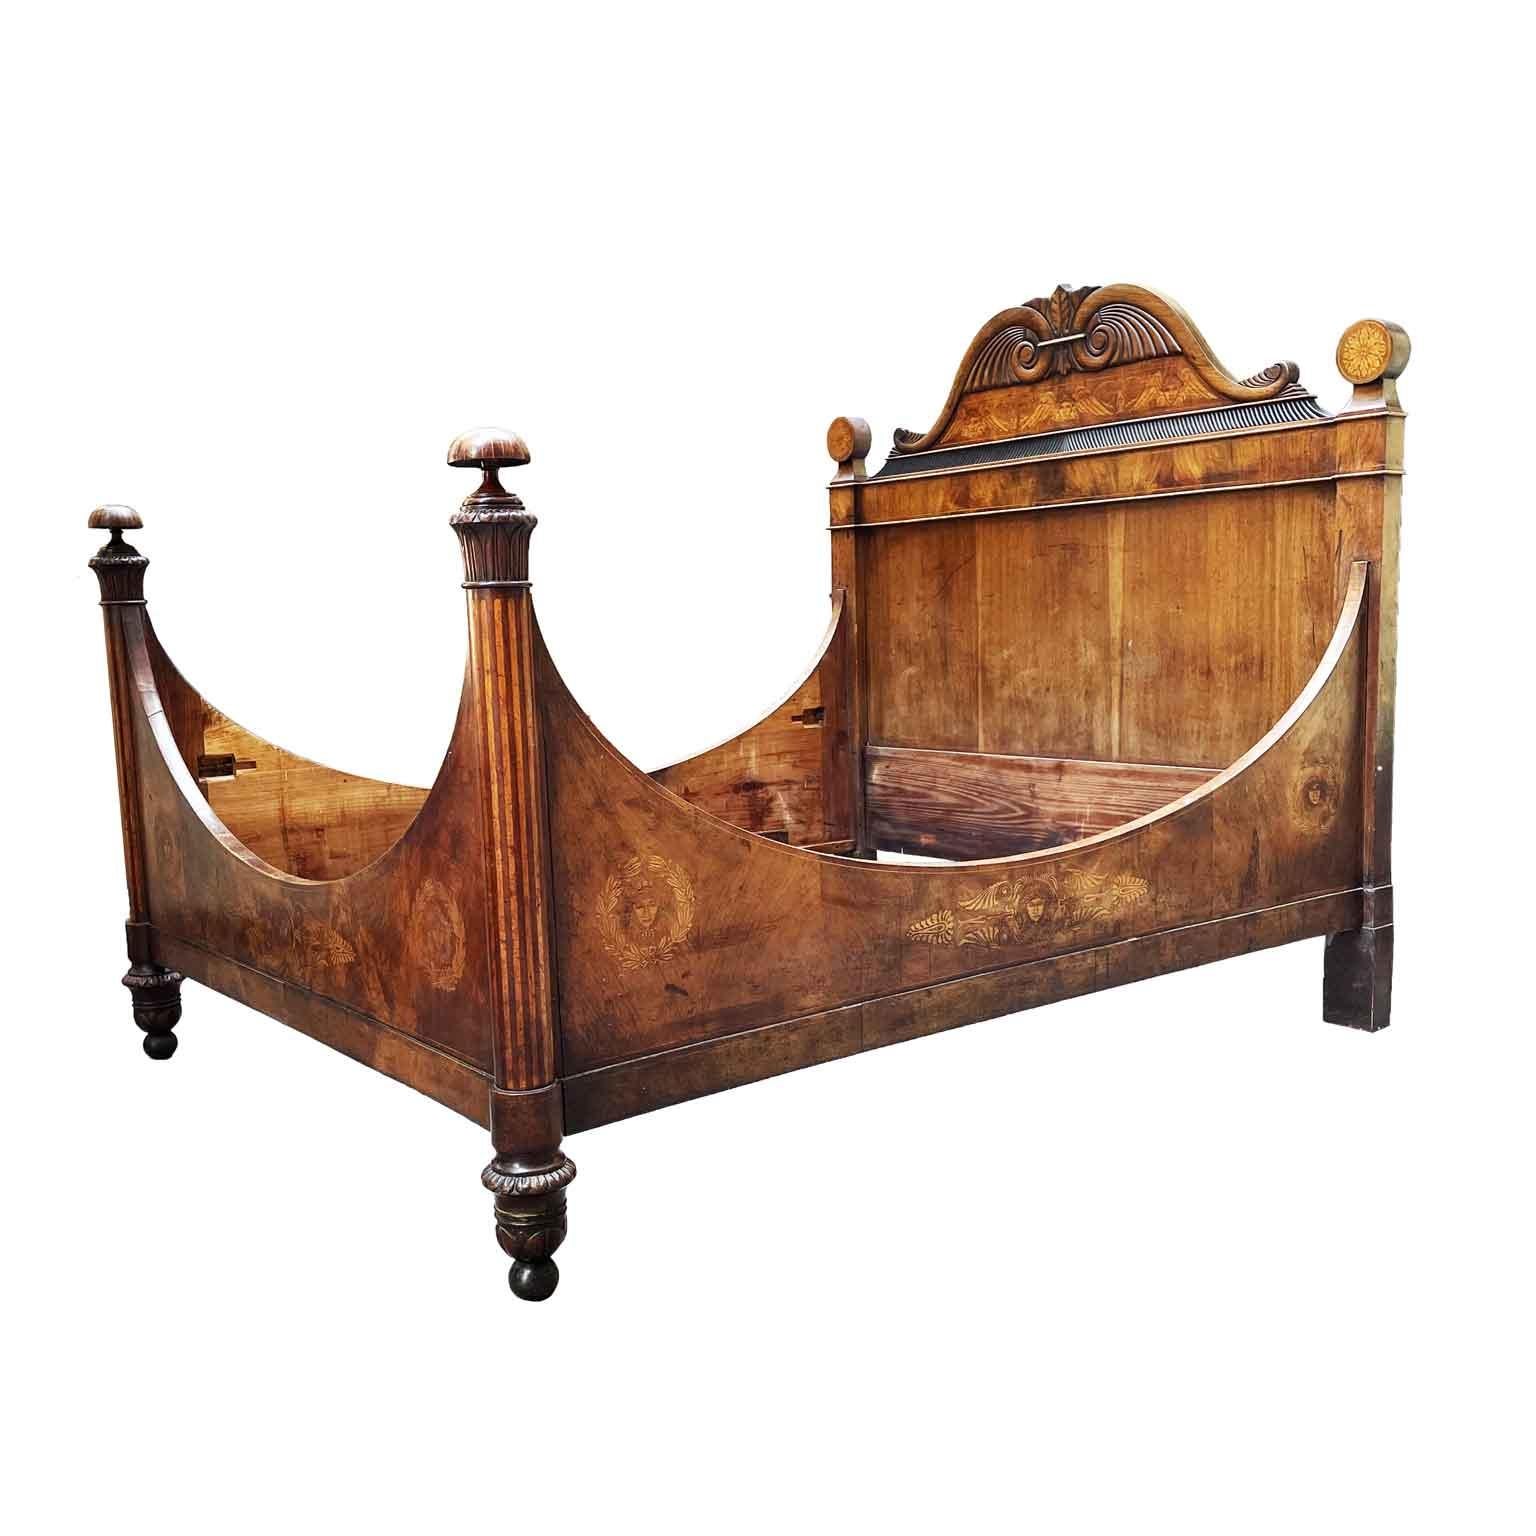 Italian carved walnut double bed dating back to the first half of 19th century, in good condition, with a great original patina. The elegant and unique bed frame is walnut veneer and decorated with masks within laurel frames and palmette decorations